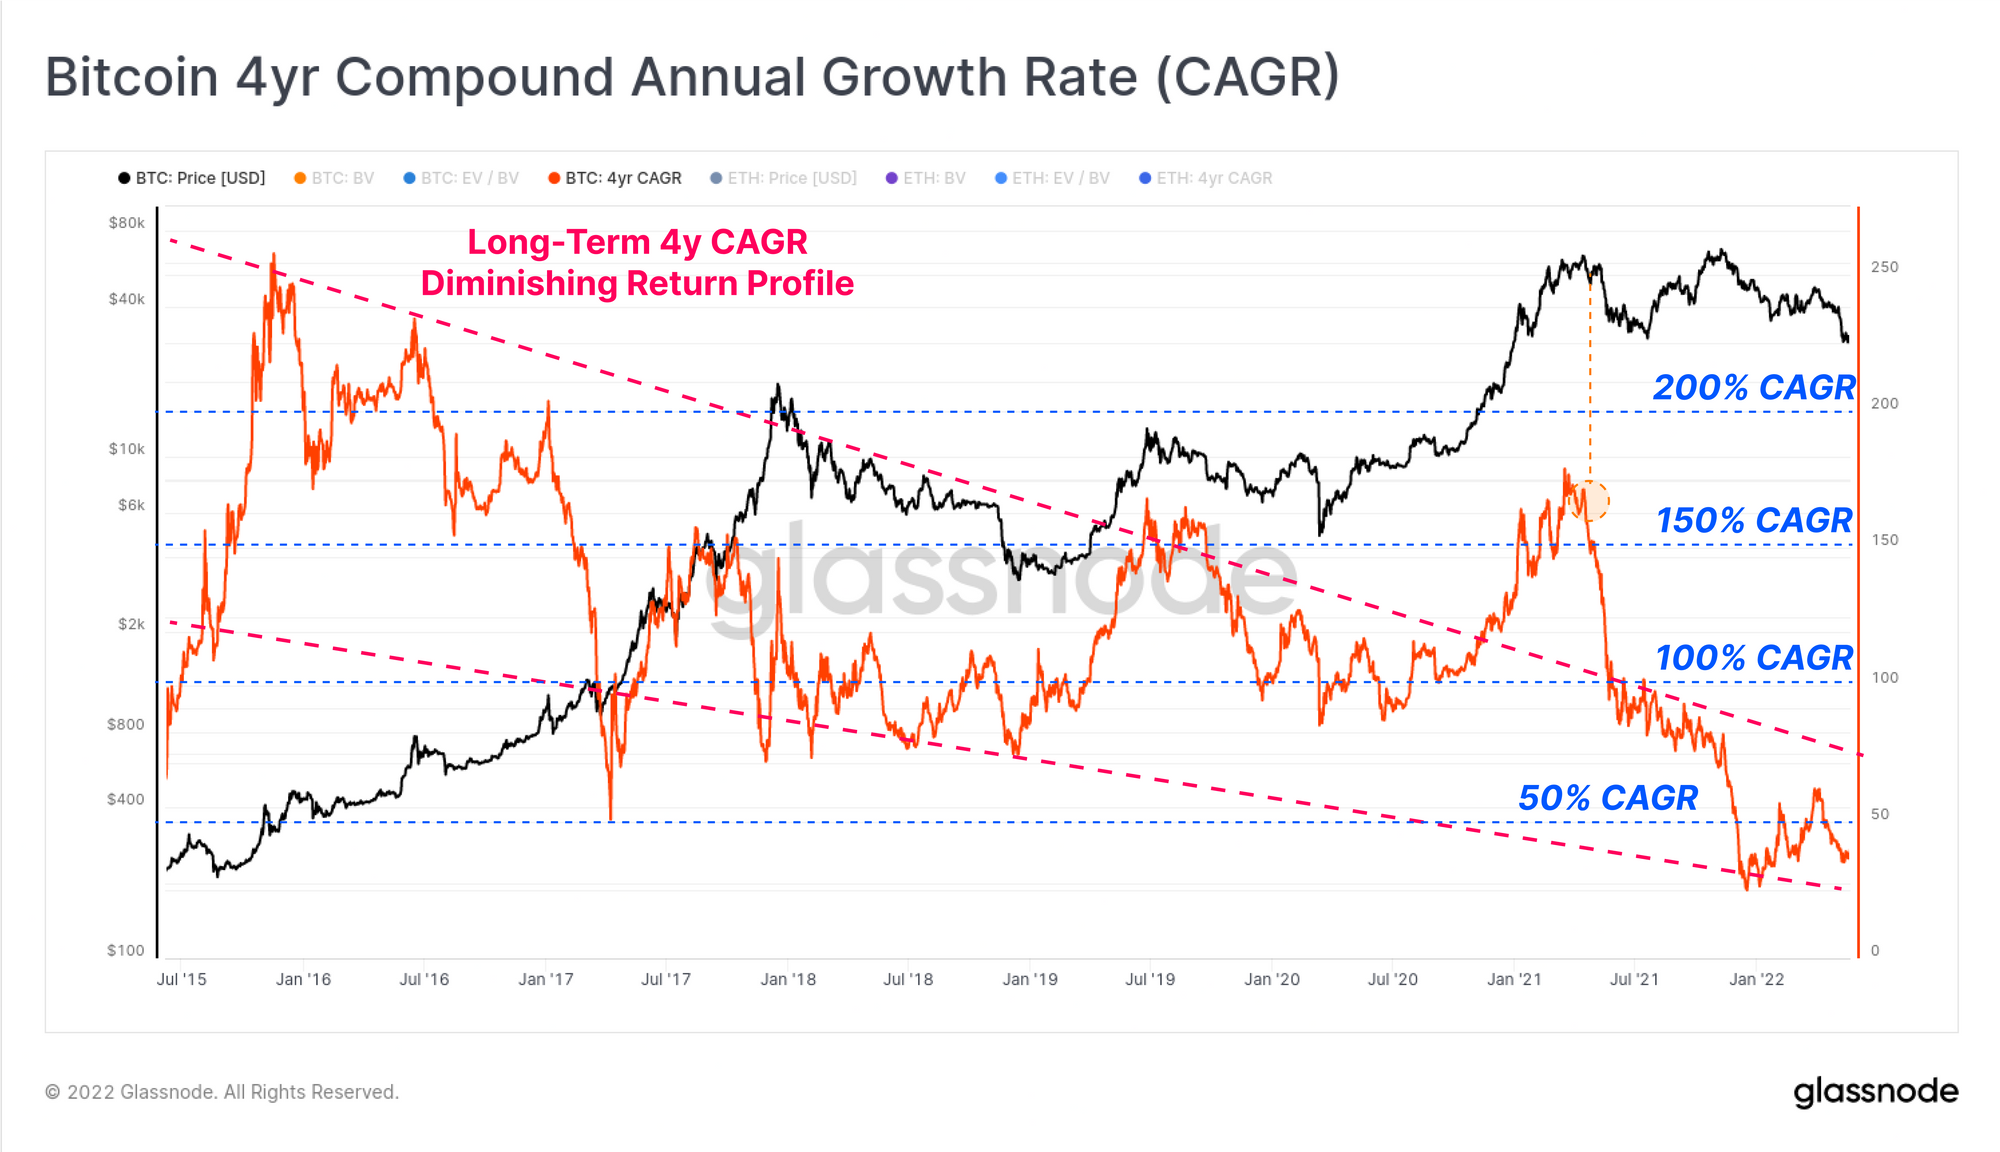 Bitcoin 4yr Compound Annual Growth Rate (CAGR)